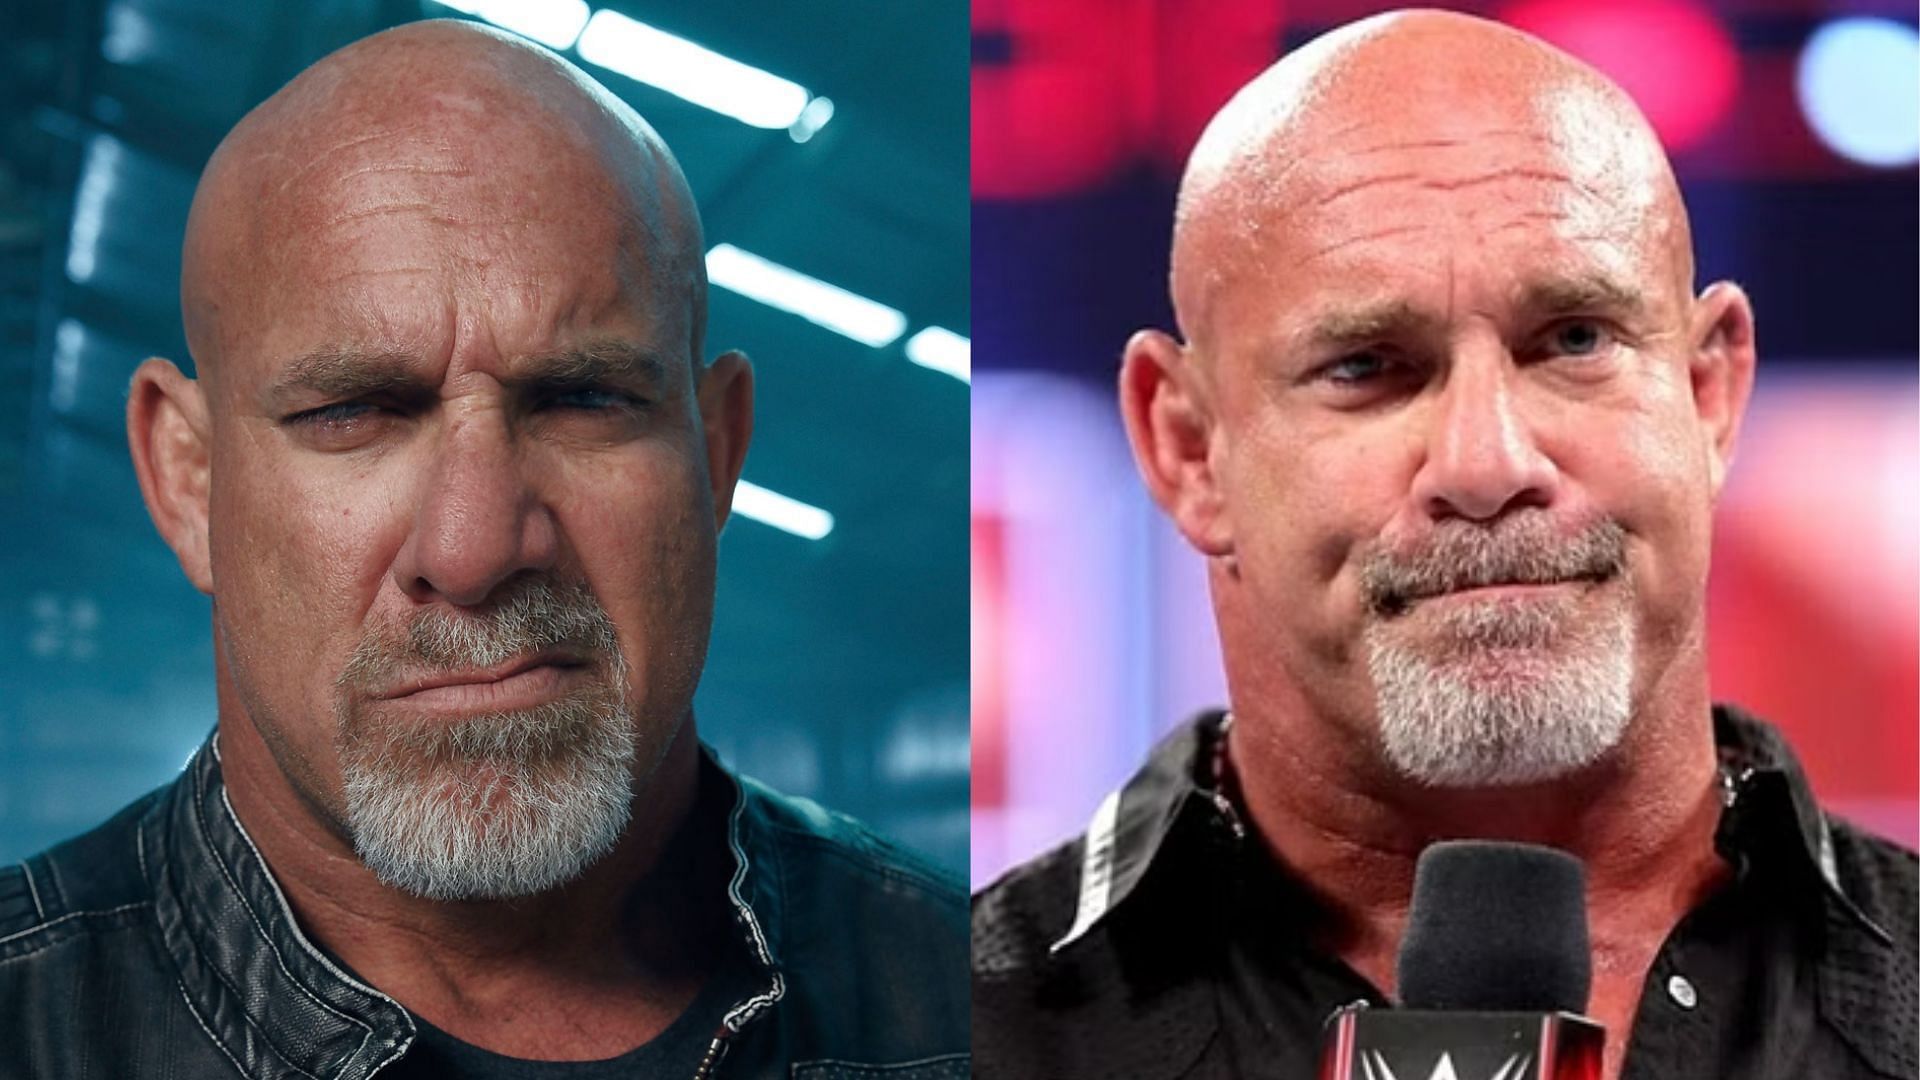 WWE legend Goldberg is currently a free agent.